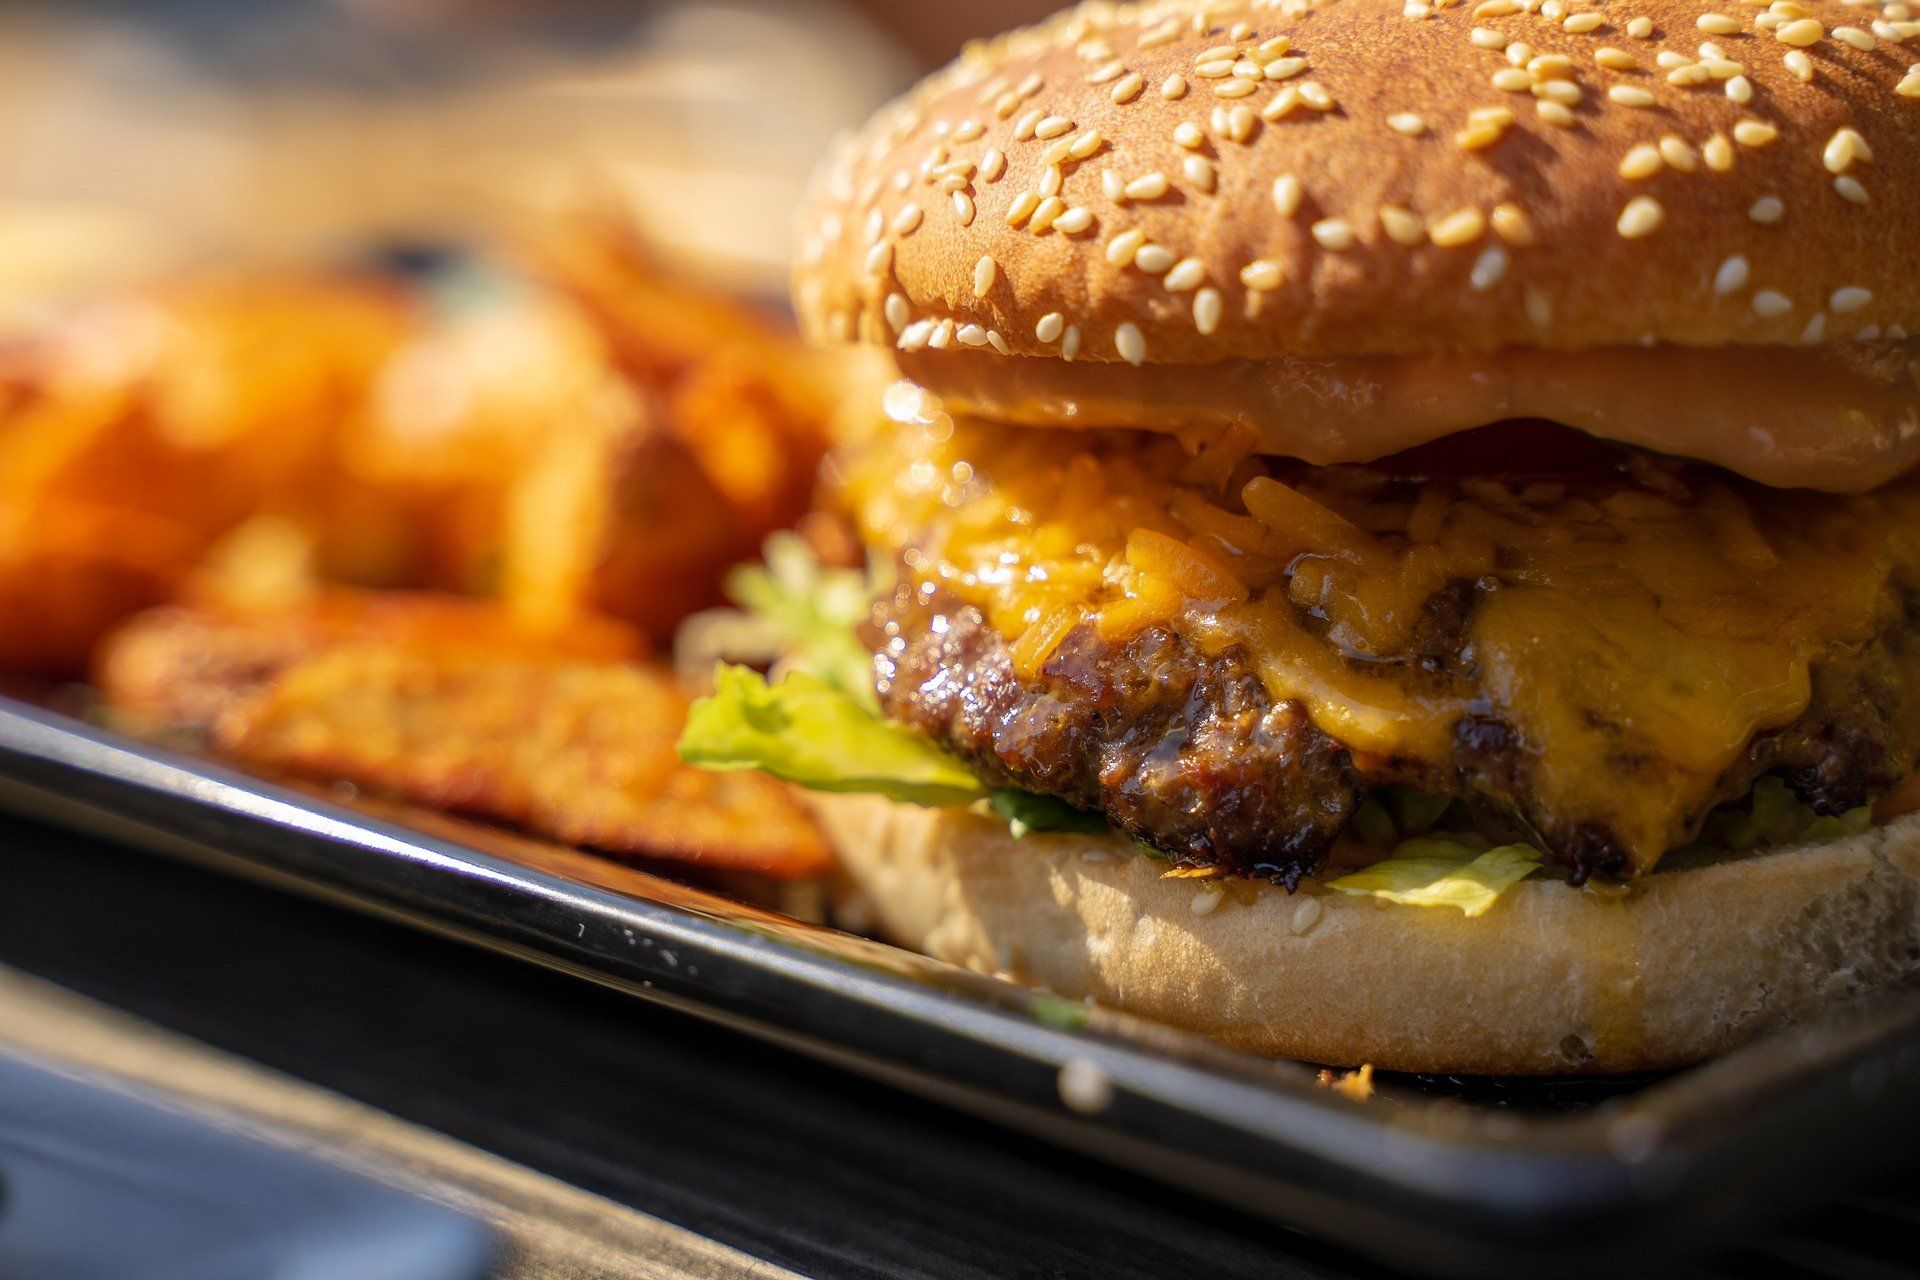 Cheeseburger with fries is not good for brain health